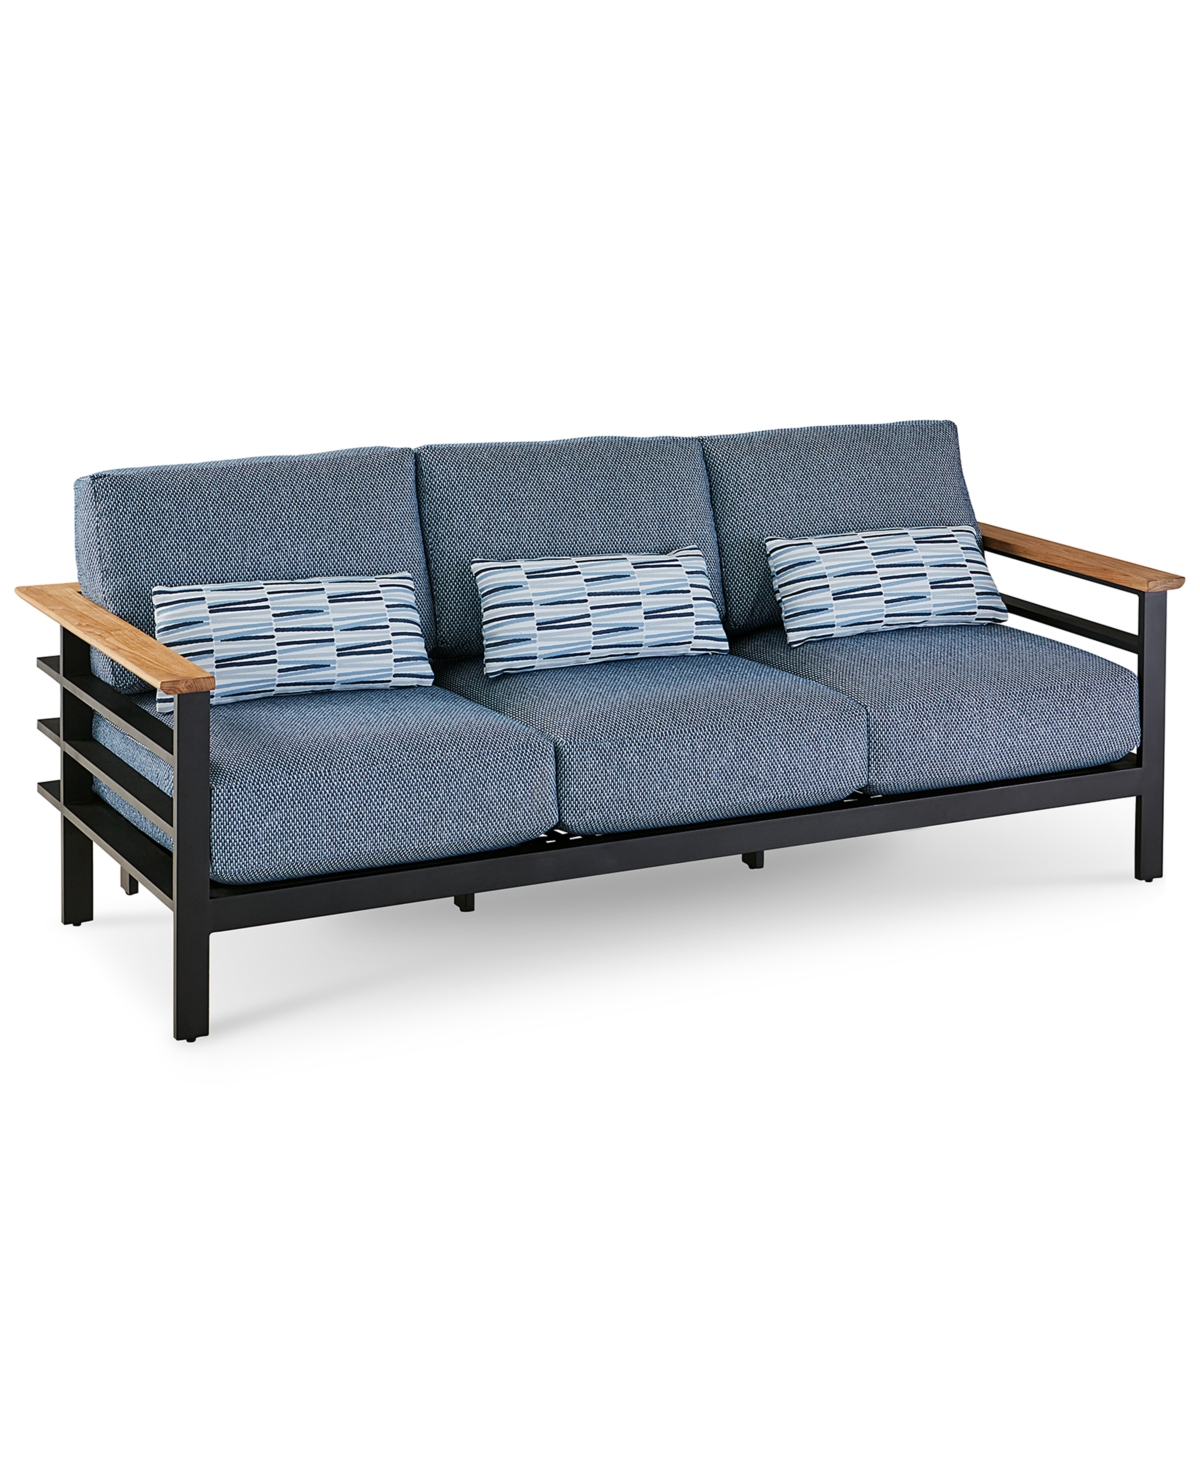 Tommy Bahama South Beach Outdoor Sofa In Cobalt Blue